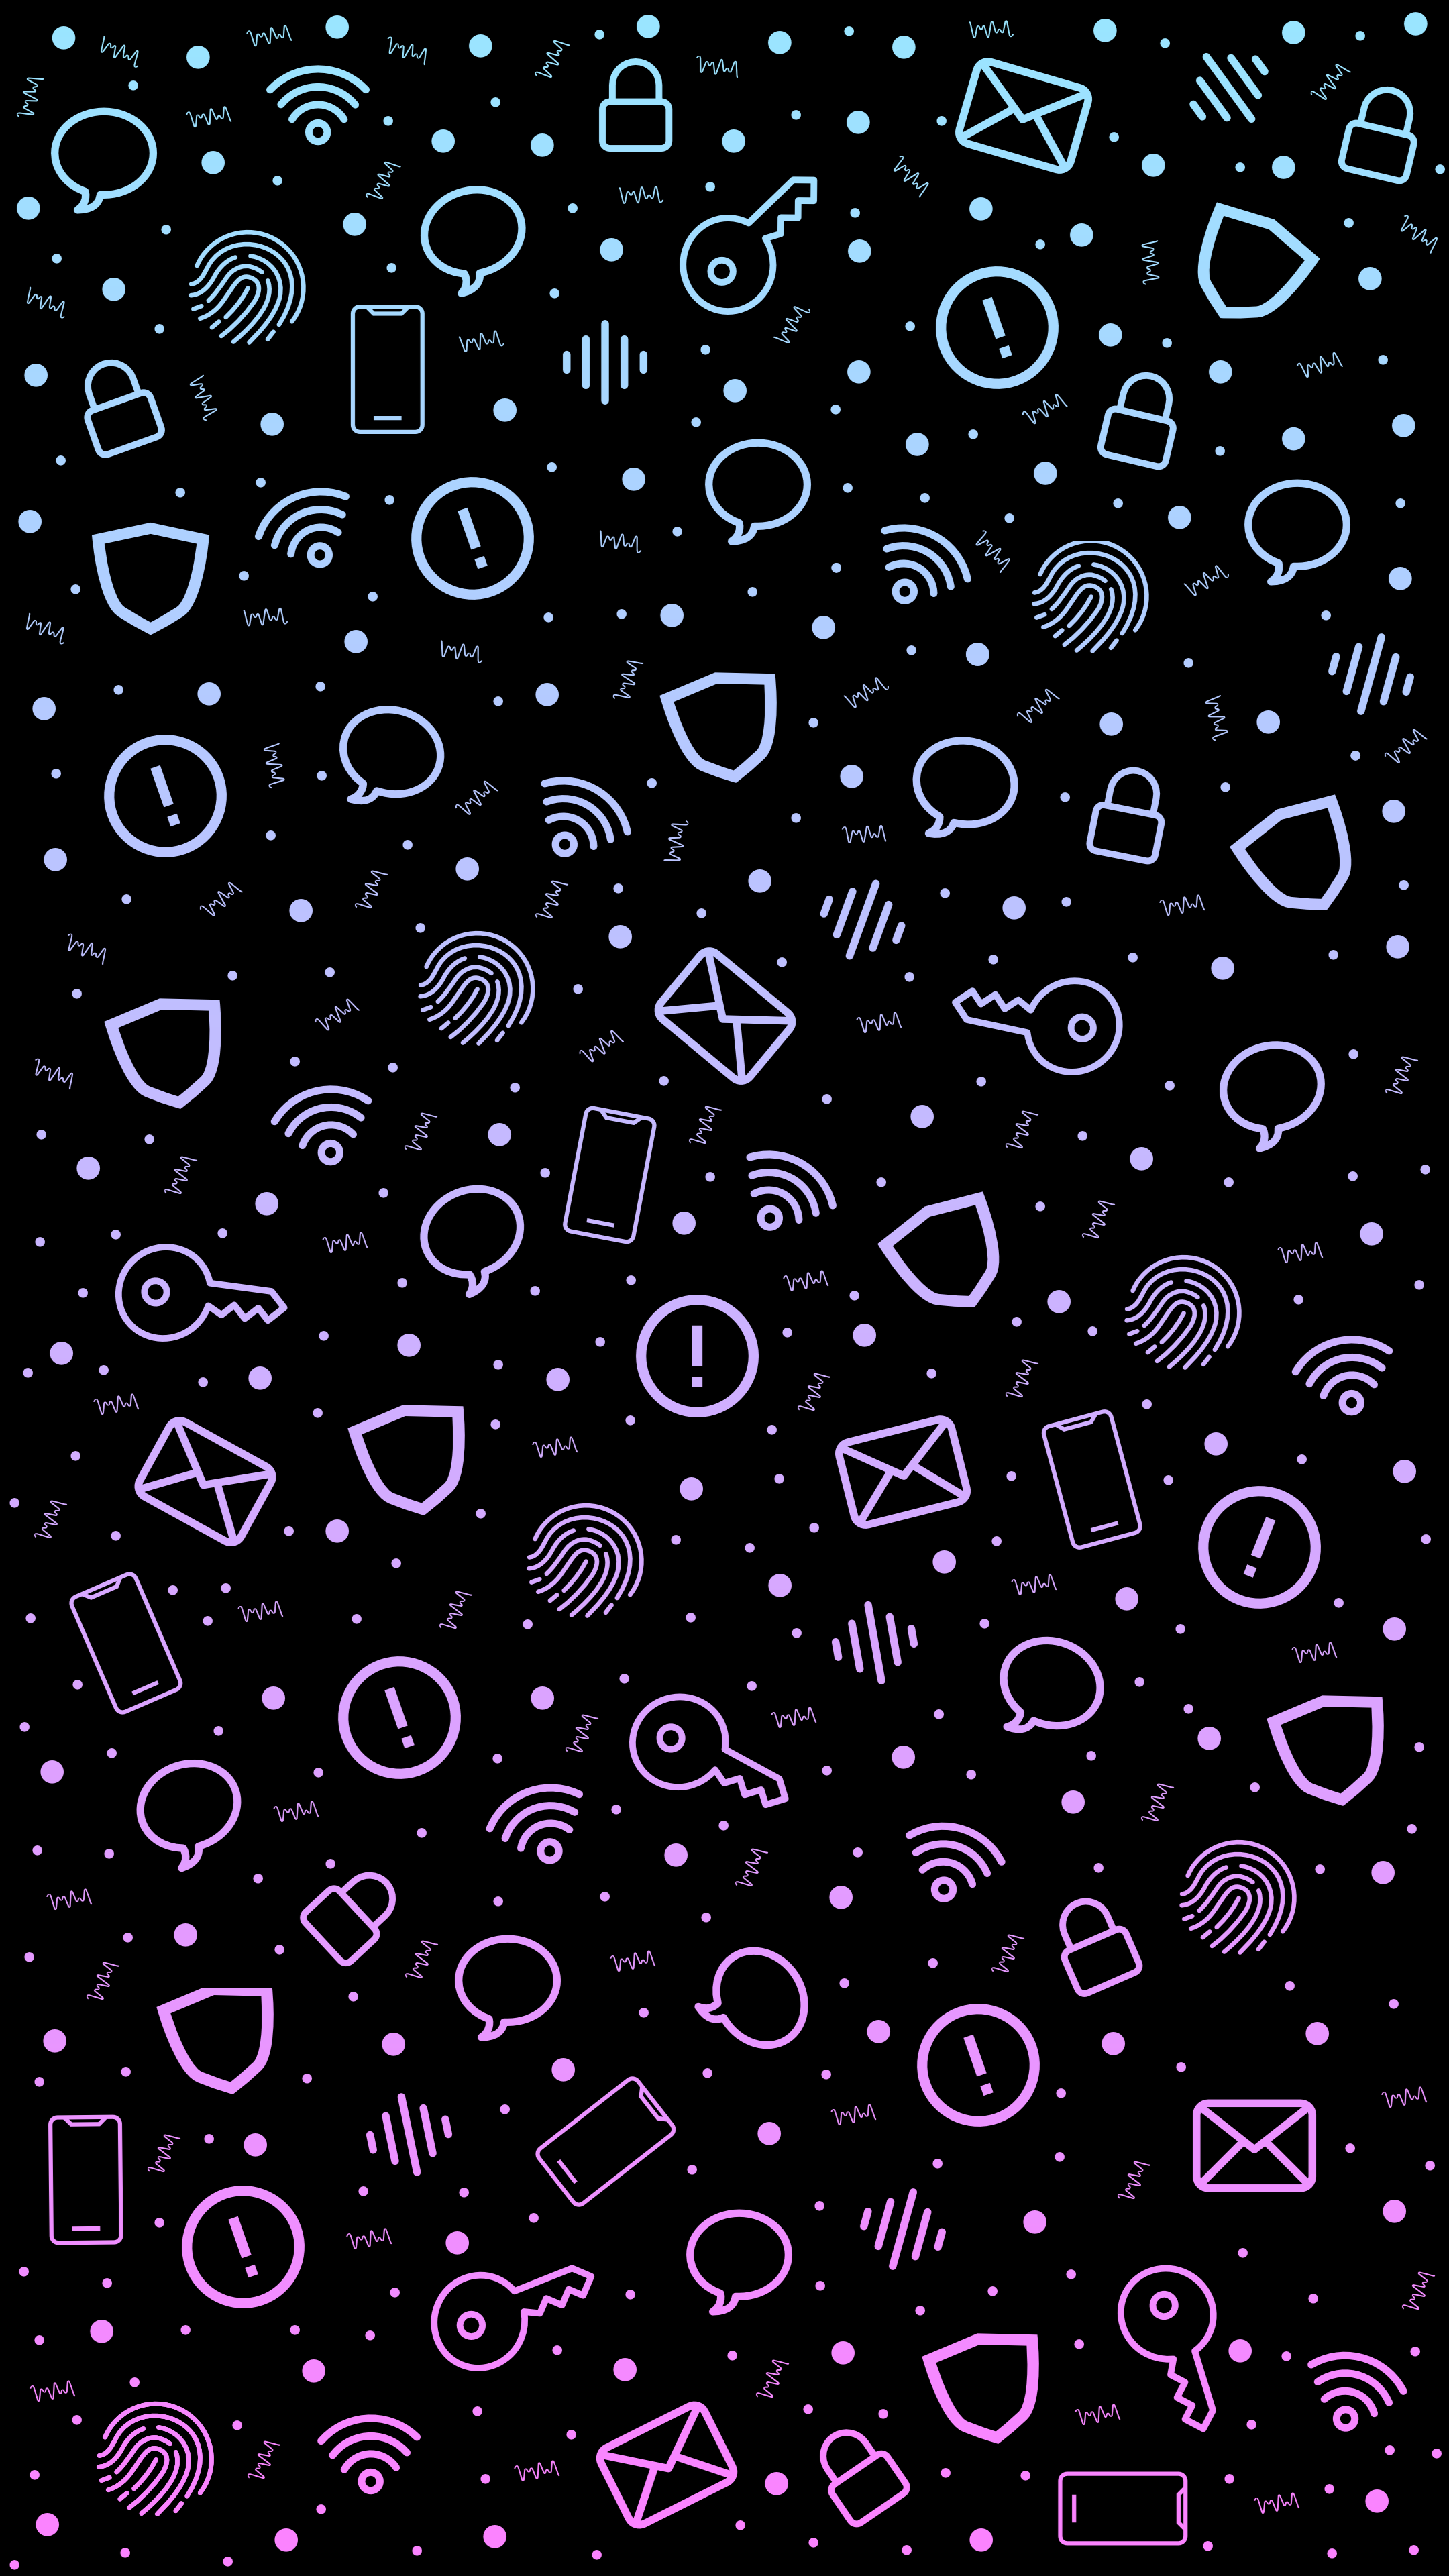 blue-pink icon background 100%